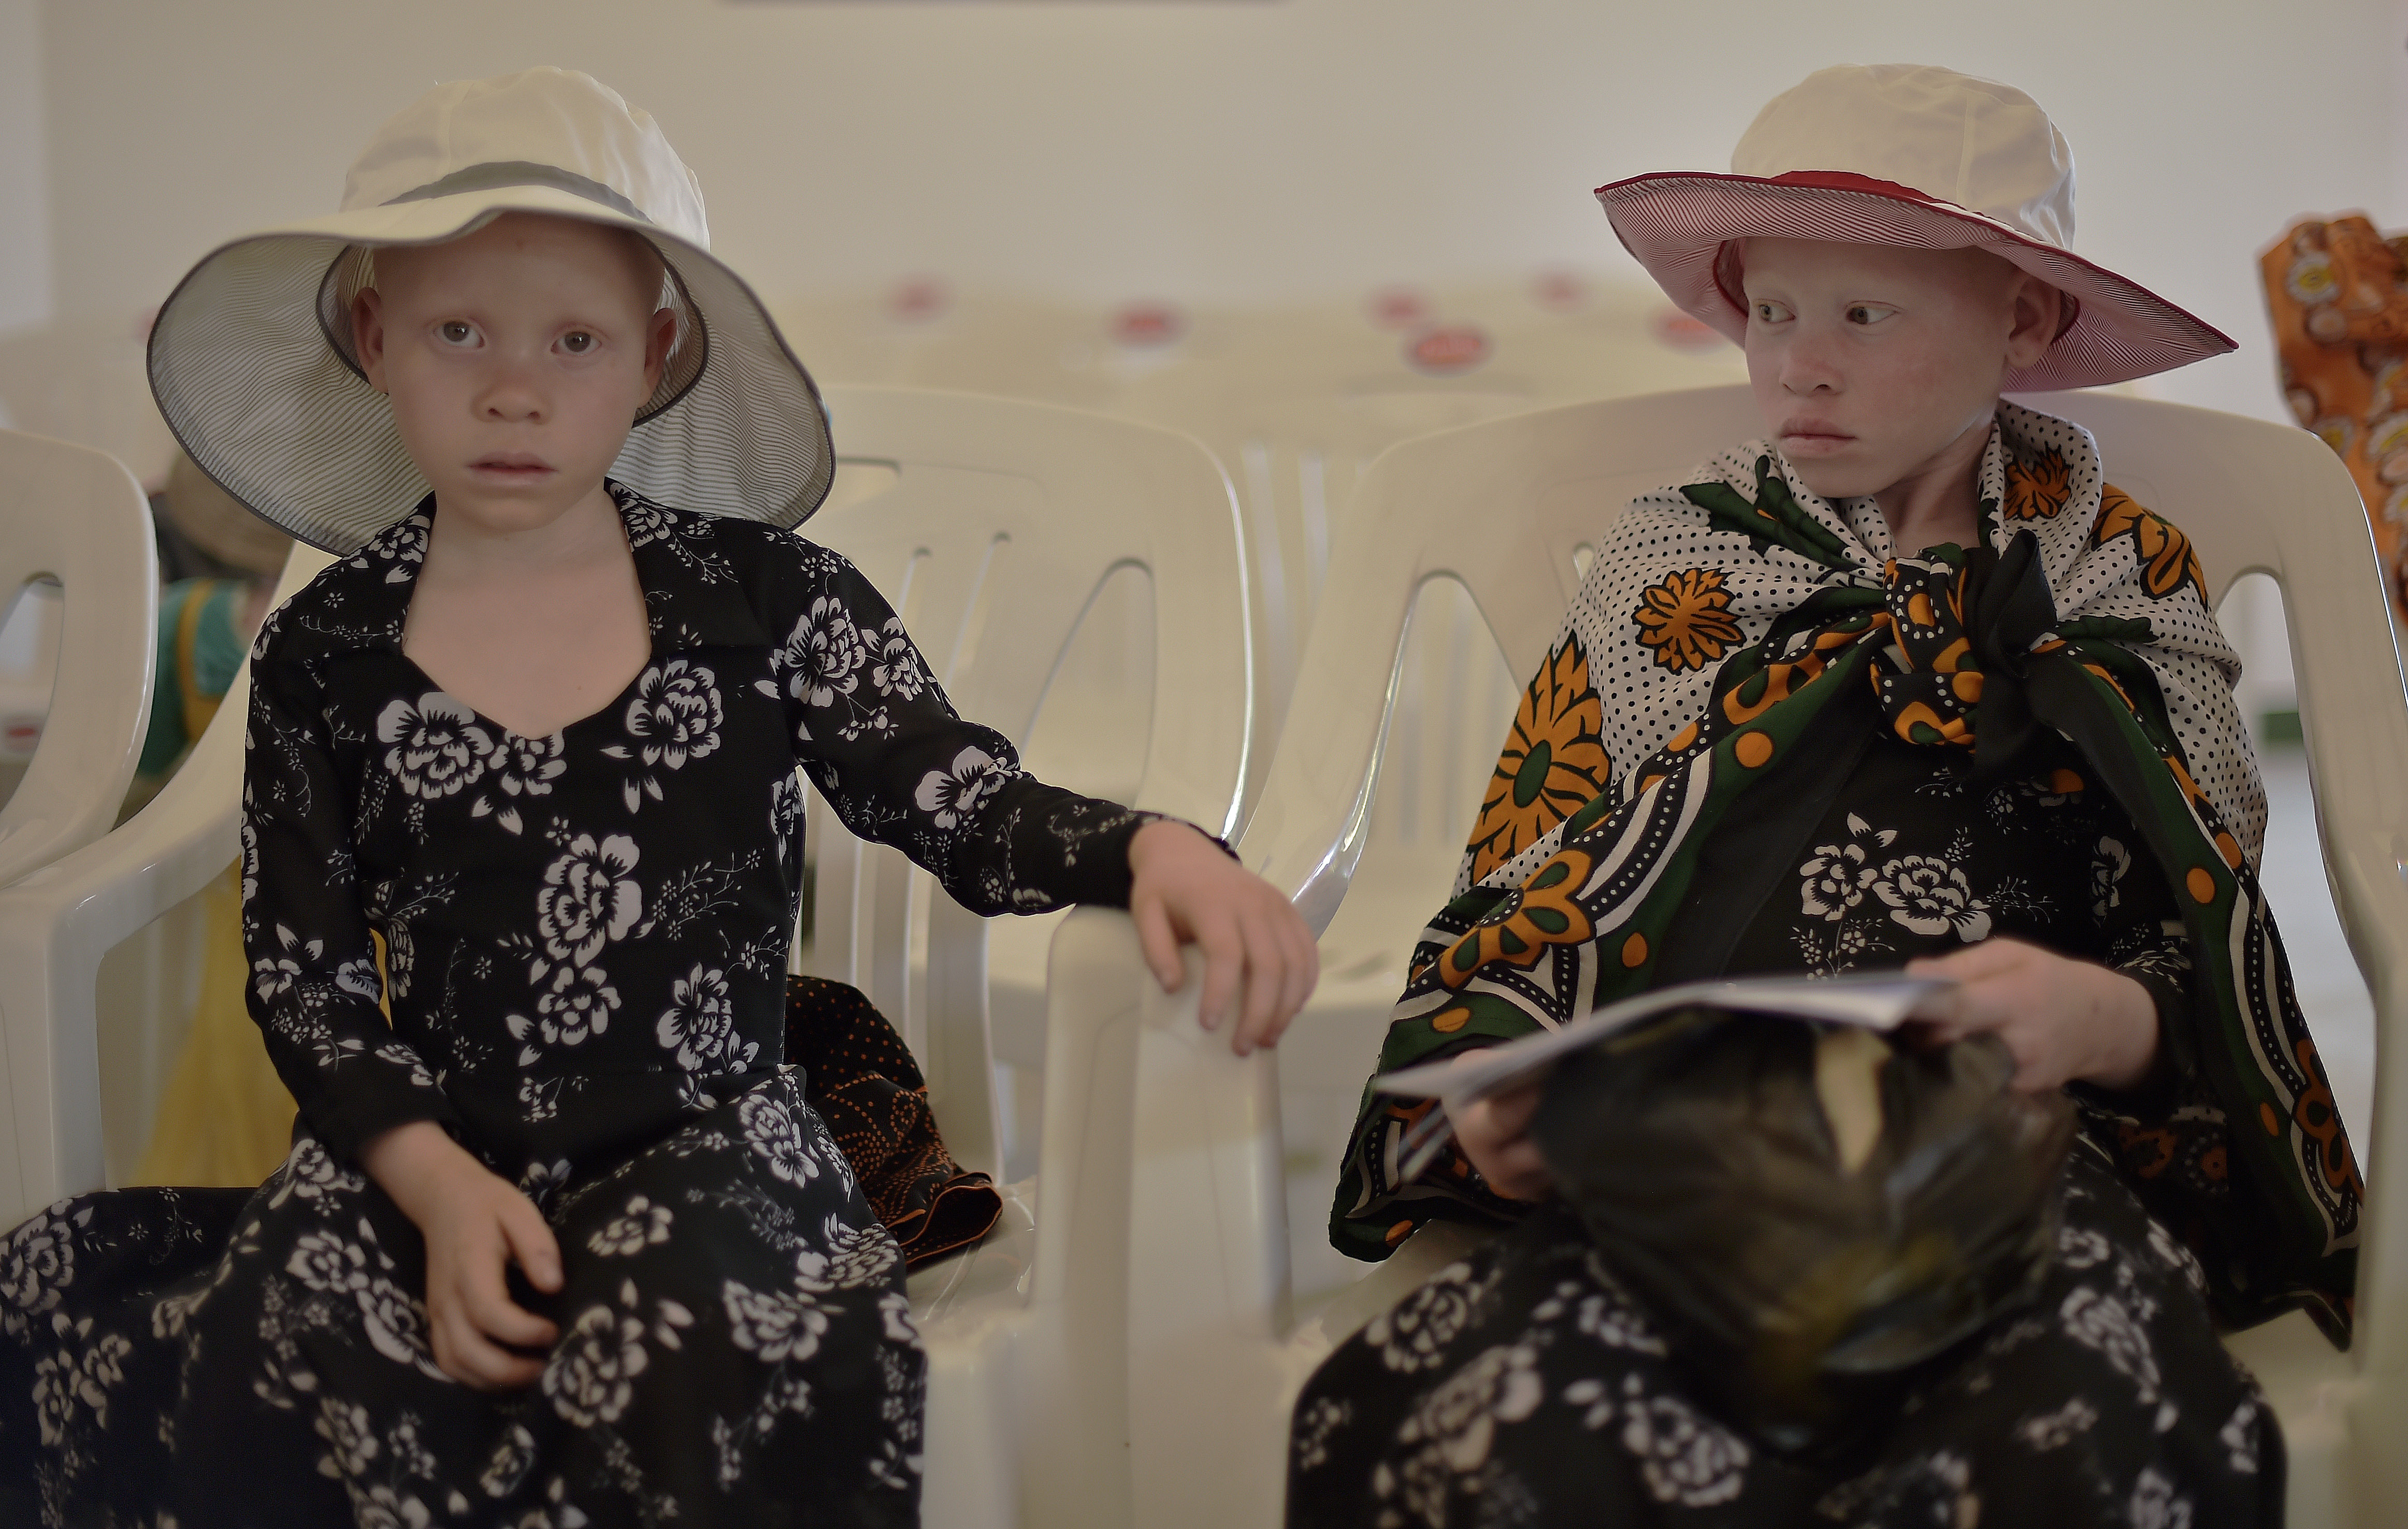 Albino girls sit as they wait at a clinic run by the Standing Voice NGO, on Ukerewe Island in Victoria lake during International Albinism Awareness day on June 13, 2016.  Albinism affects the development of human eyes so eye checks are a vital service needed by Albinos. Ukerewe island is home to many albinos. Many of the first albinos to live on the island were taken there and abandoned by their families as children or fled from violence they had faced on the mainland. Ukerewe island is now seen as a safer place for Albinos to live and integrate, as supersperstition has caused the practice of mutilation and killing of albinos by some witchdoctors for many years both in Tanzania and other African countries. / AFP PHOTO / CARL DE SOUZA